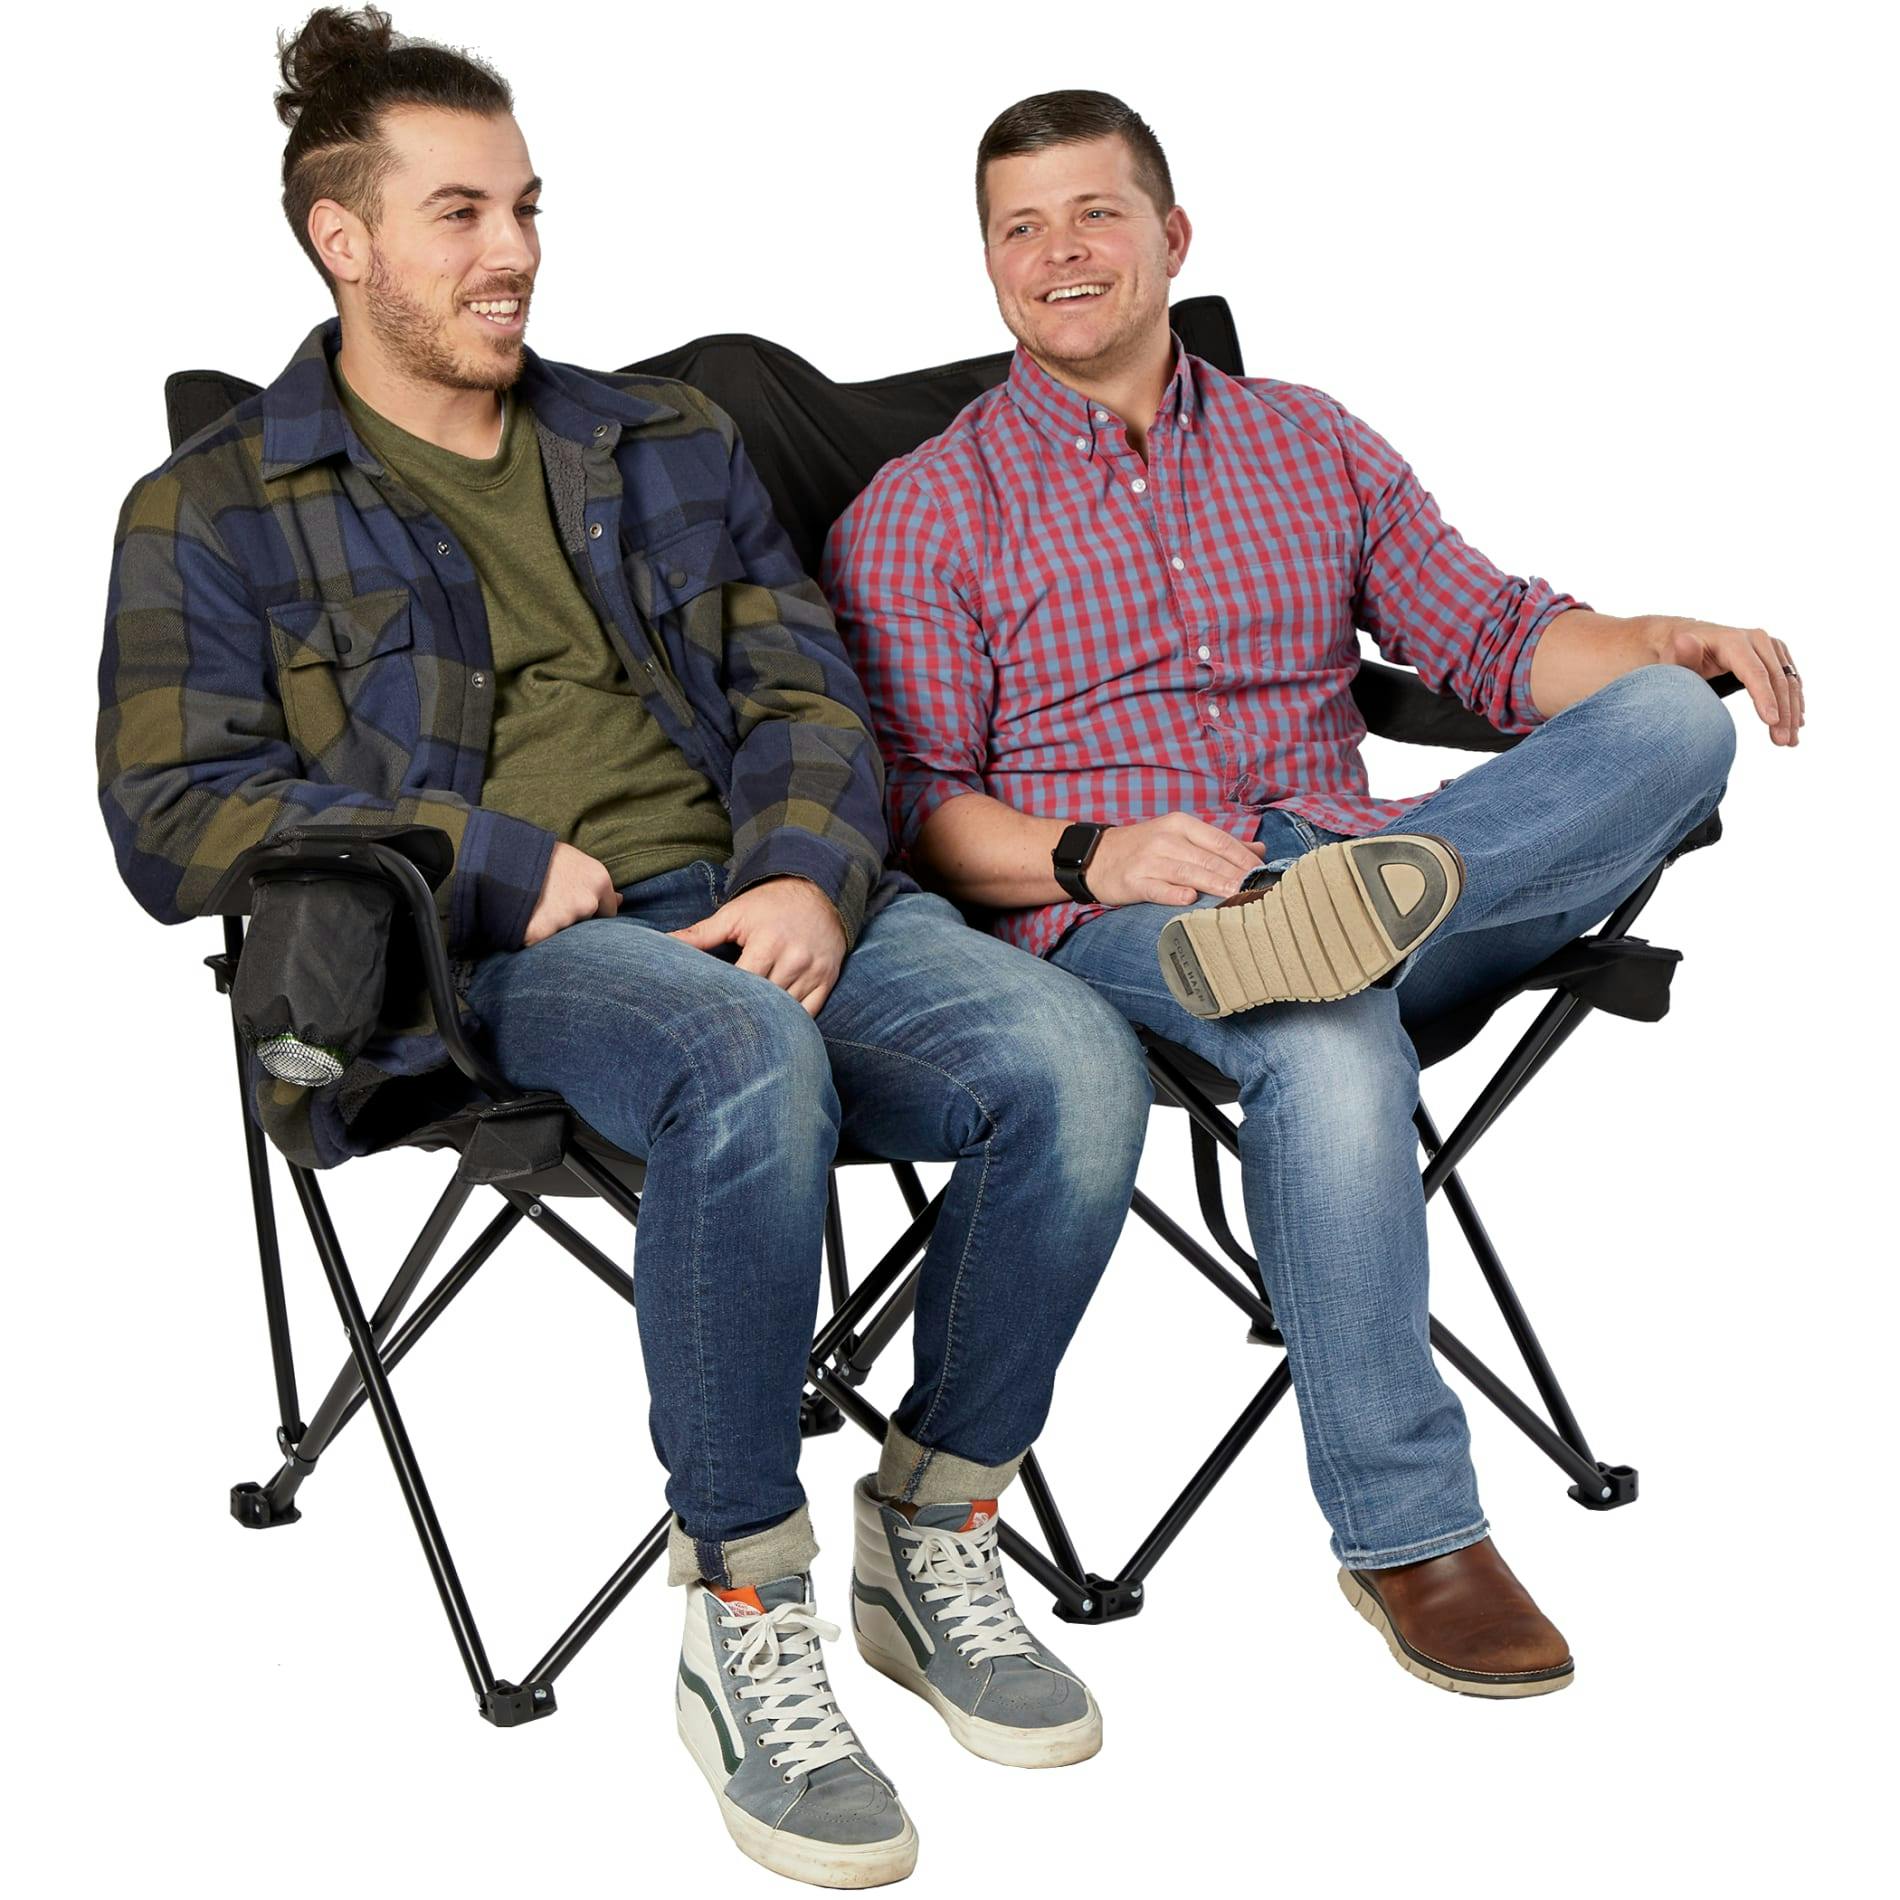 Double Seater Folding Chair - additional Image 4